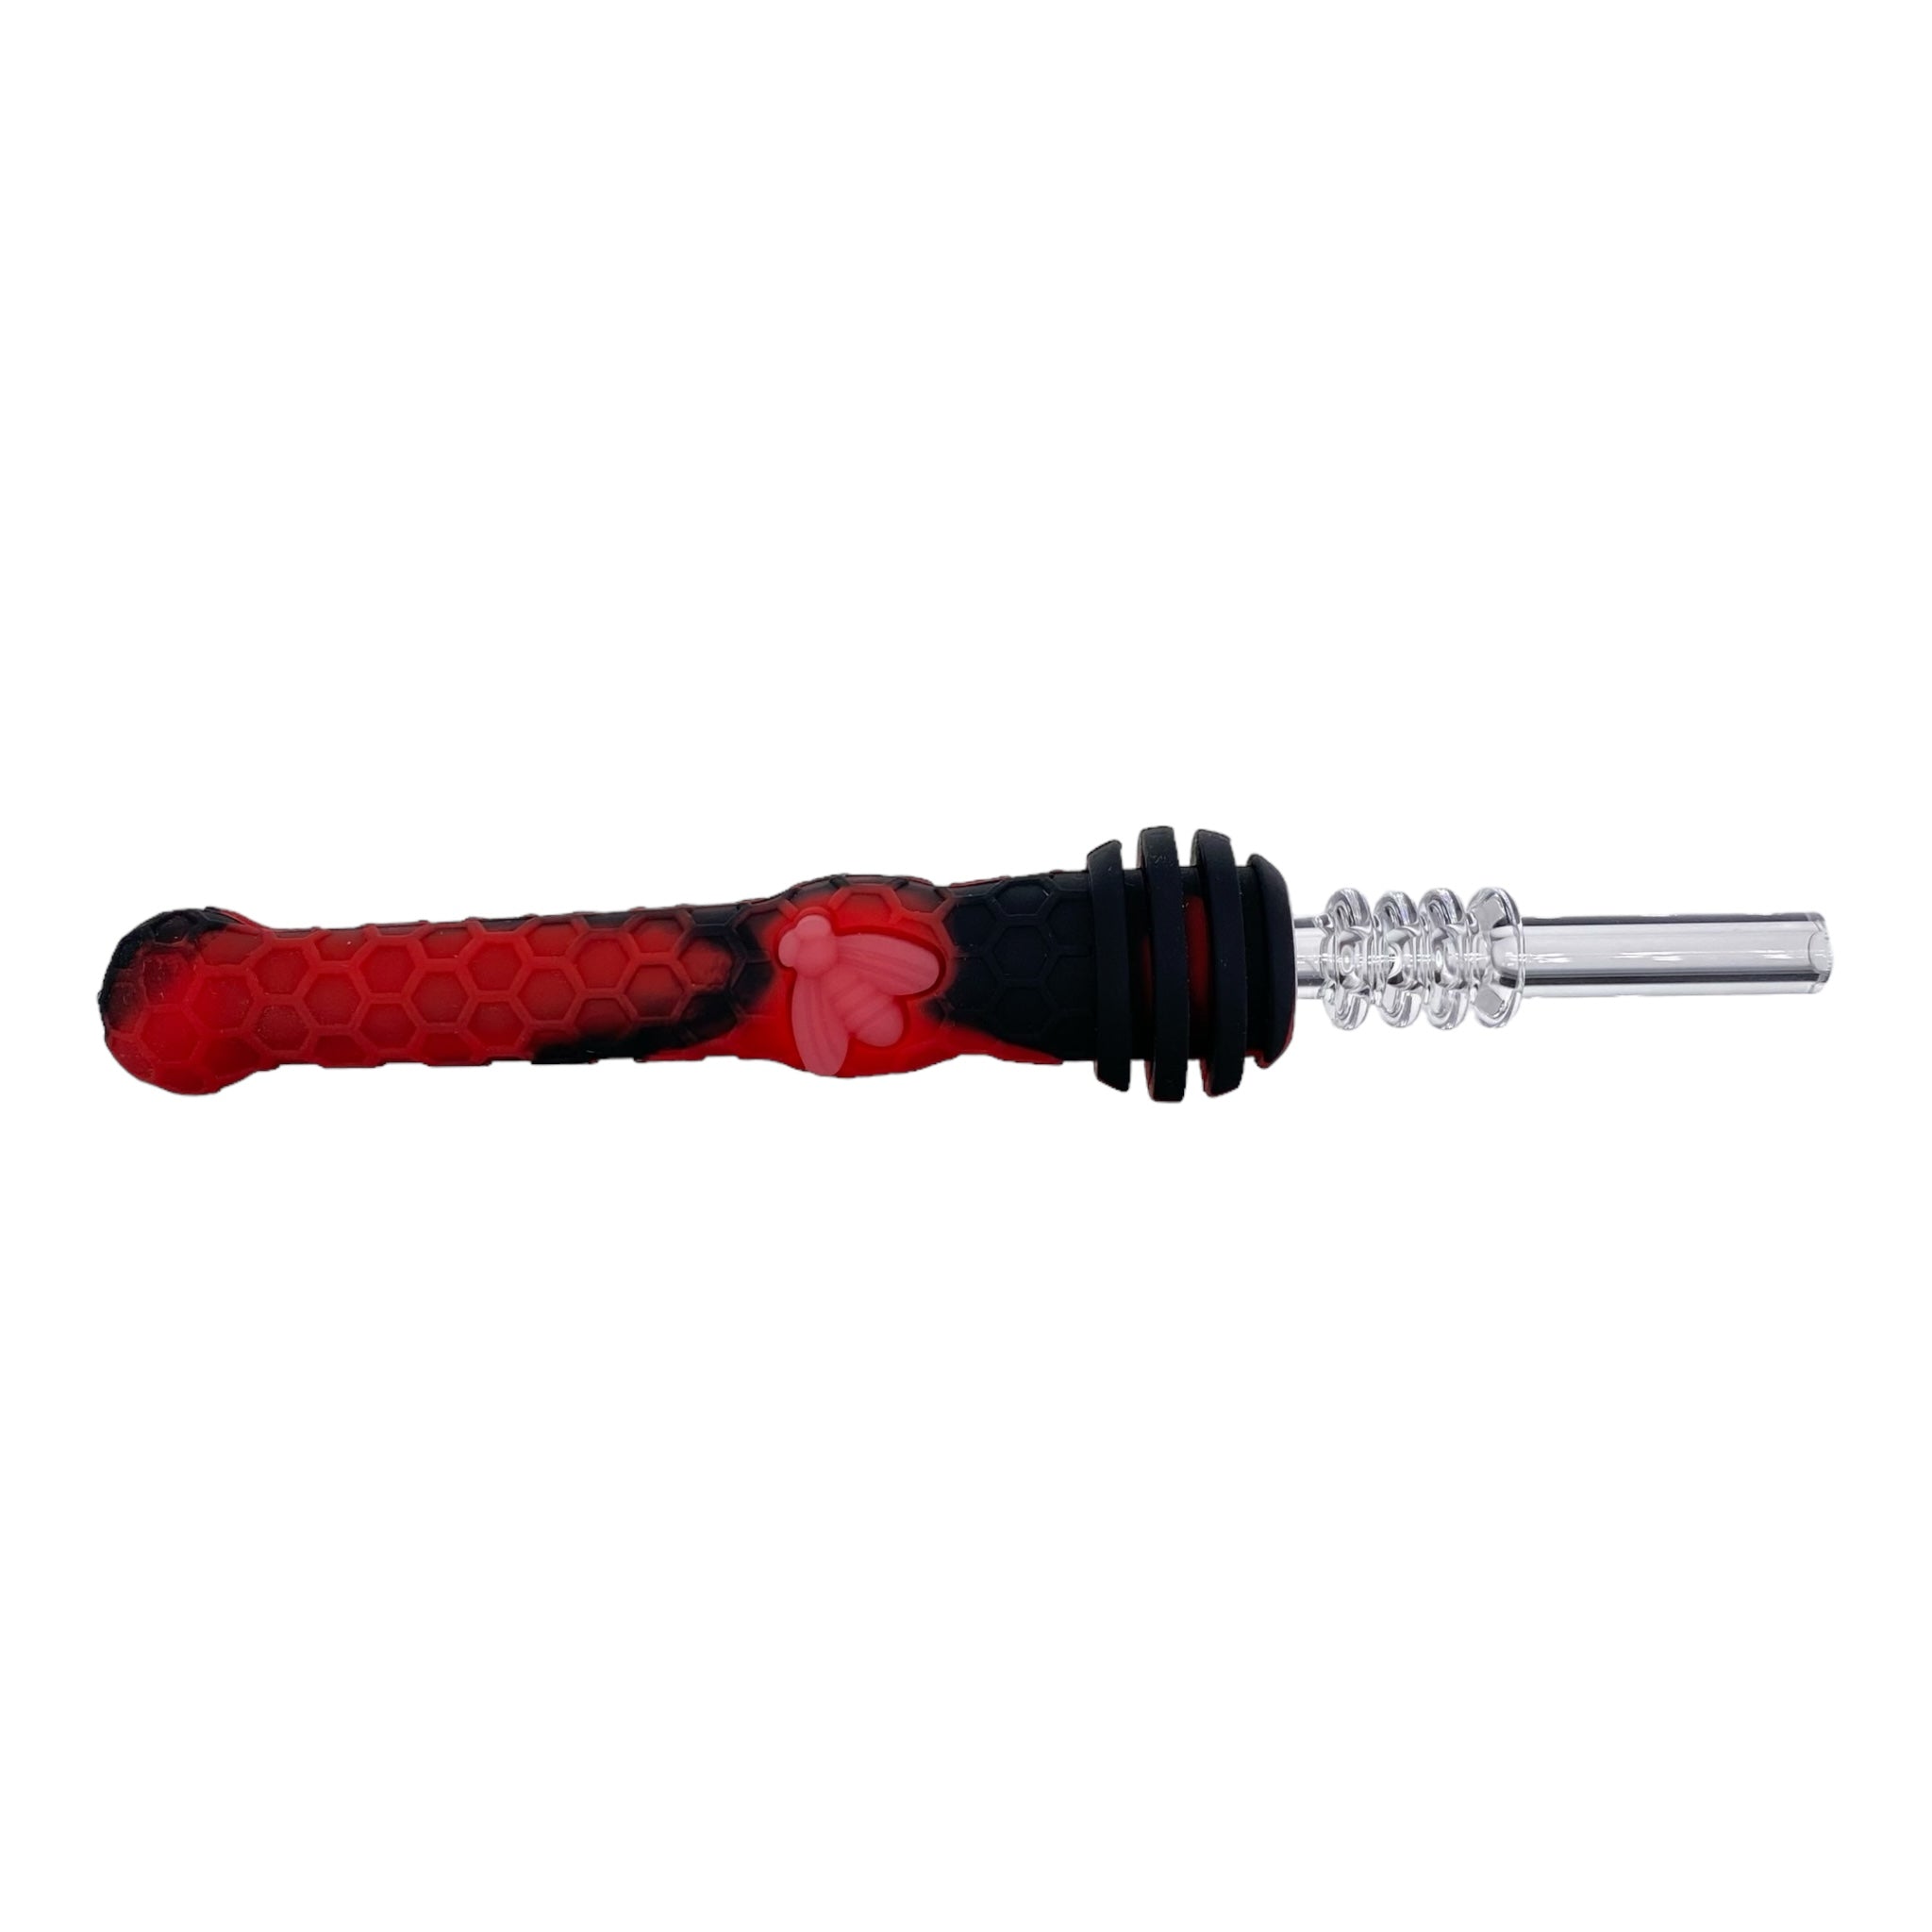 Red And Black Silicone Nectar Collector Dab Straw